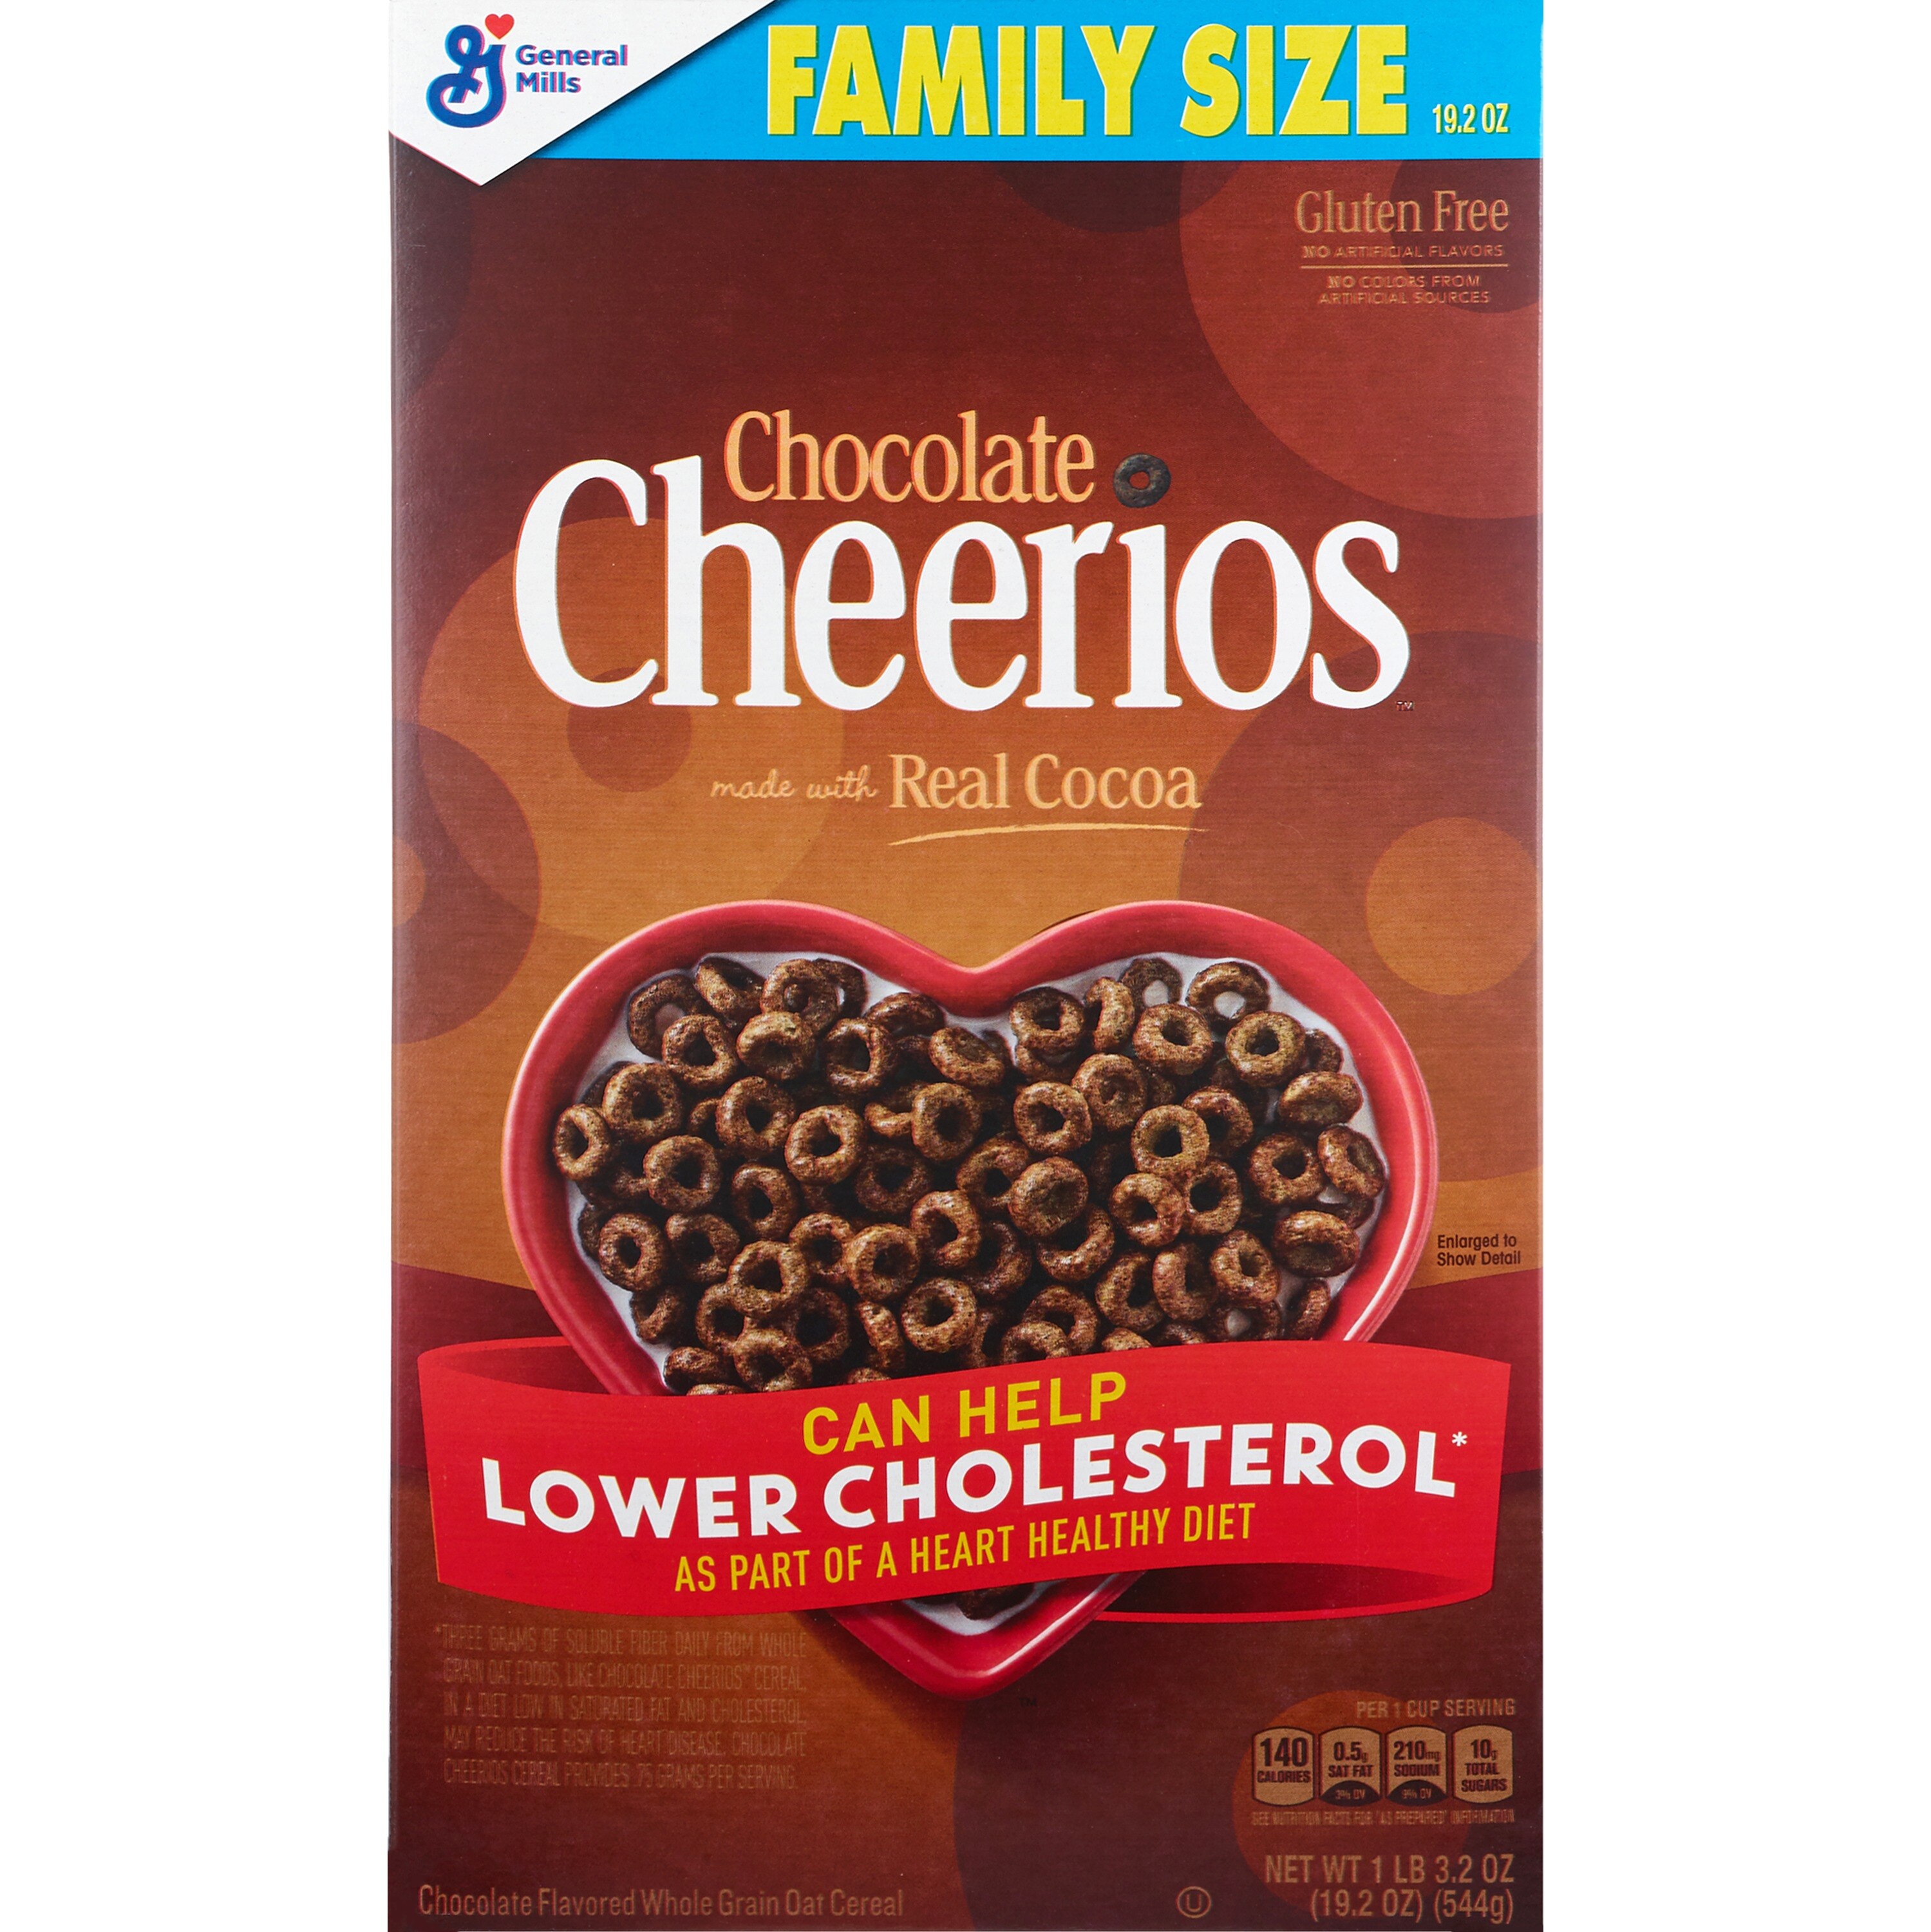 Chocolate Cheerios Breakfast Cereal with Oats Family Size, 19.2 oz